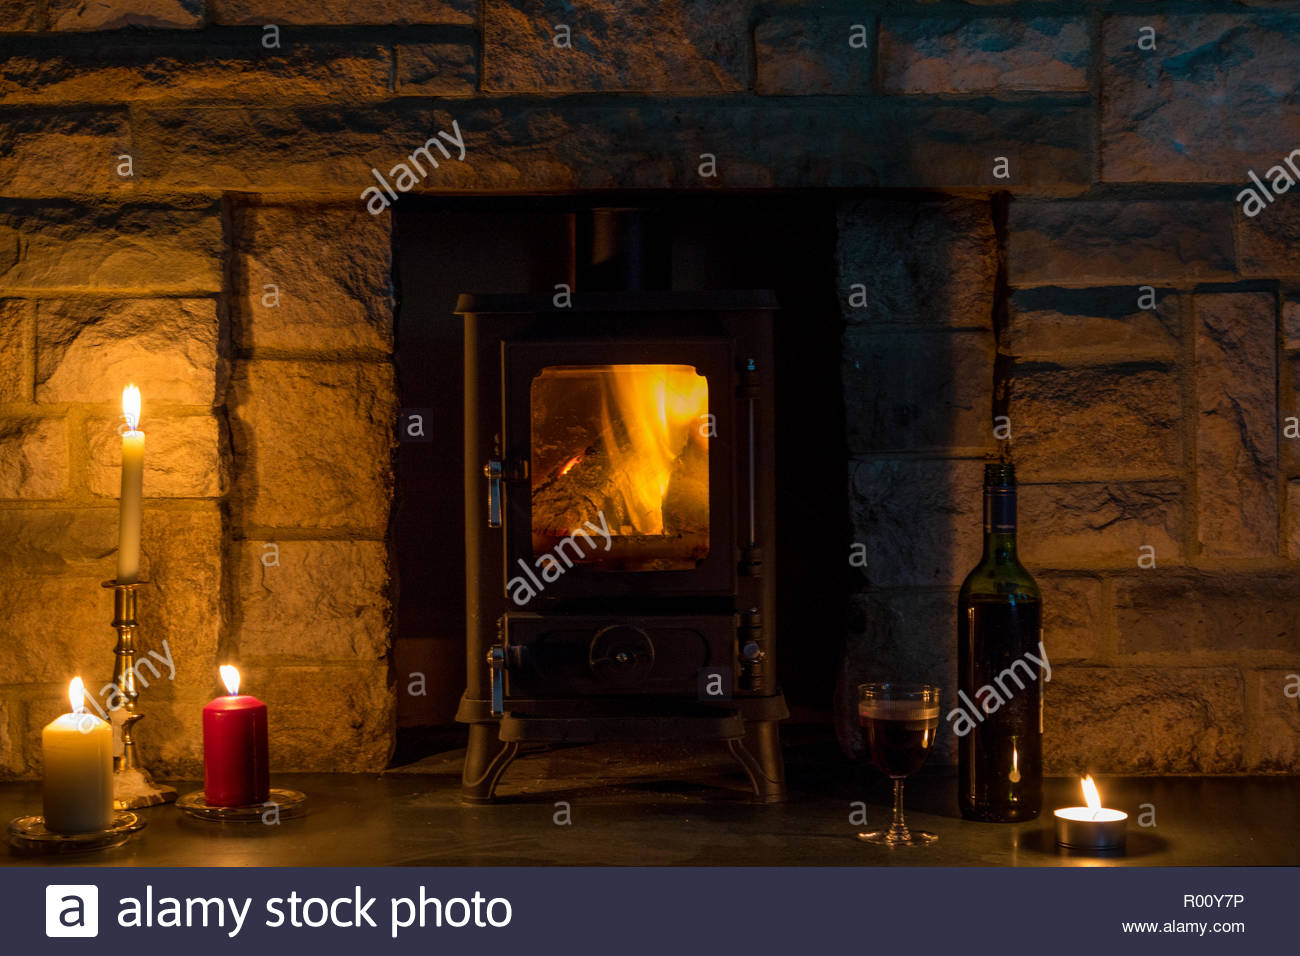 hygge concept a log burner candles and a wine bottle and glass in a stone fireplace R00Y7P